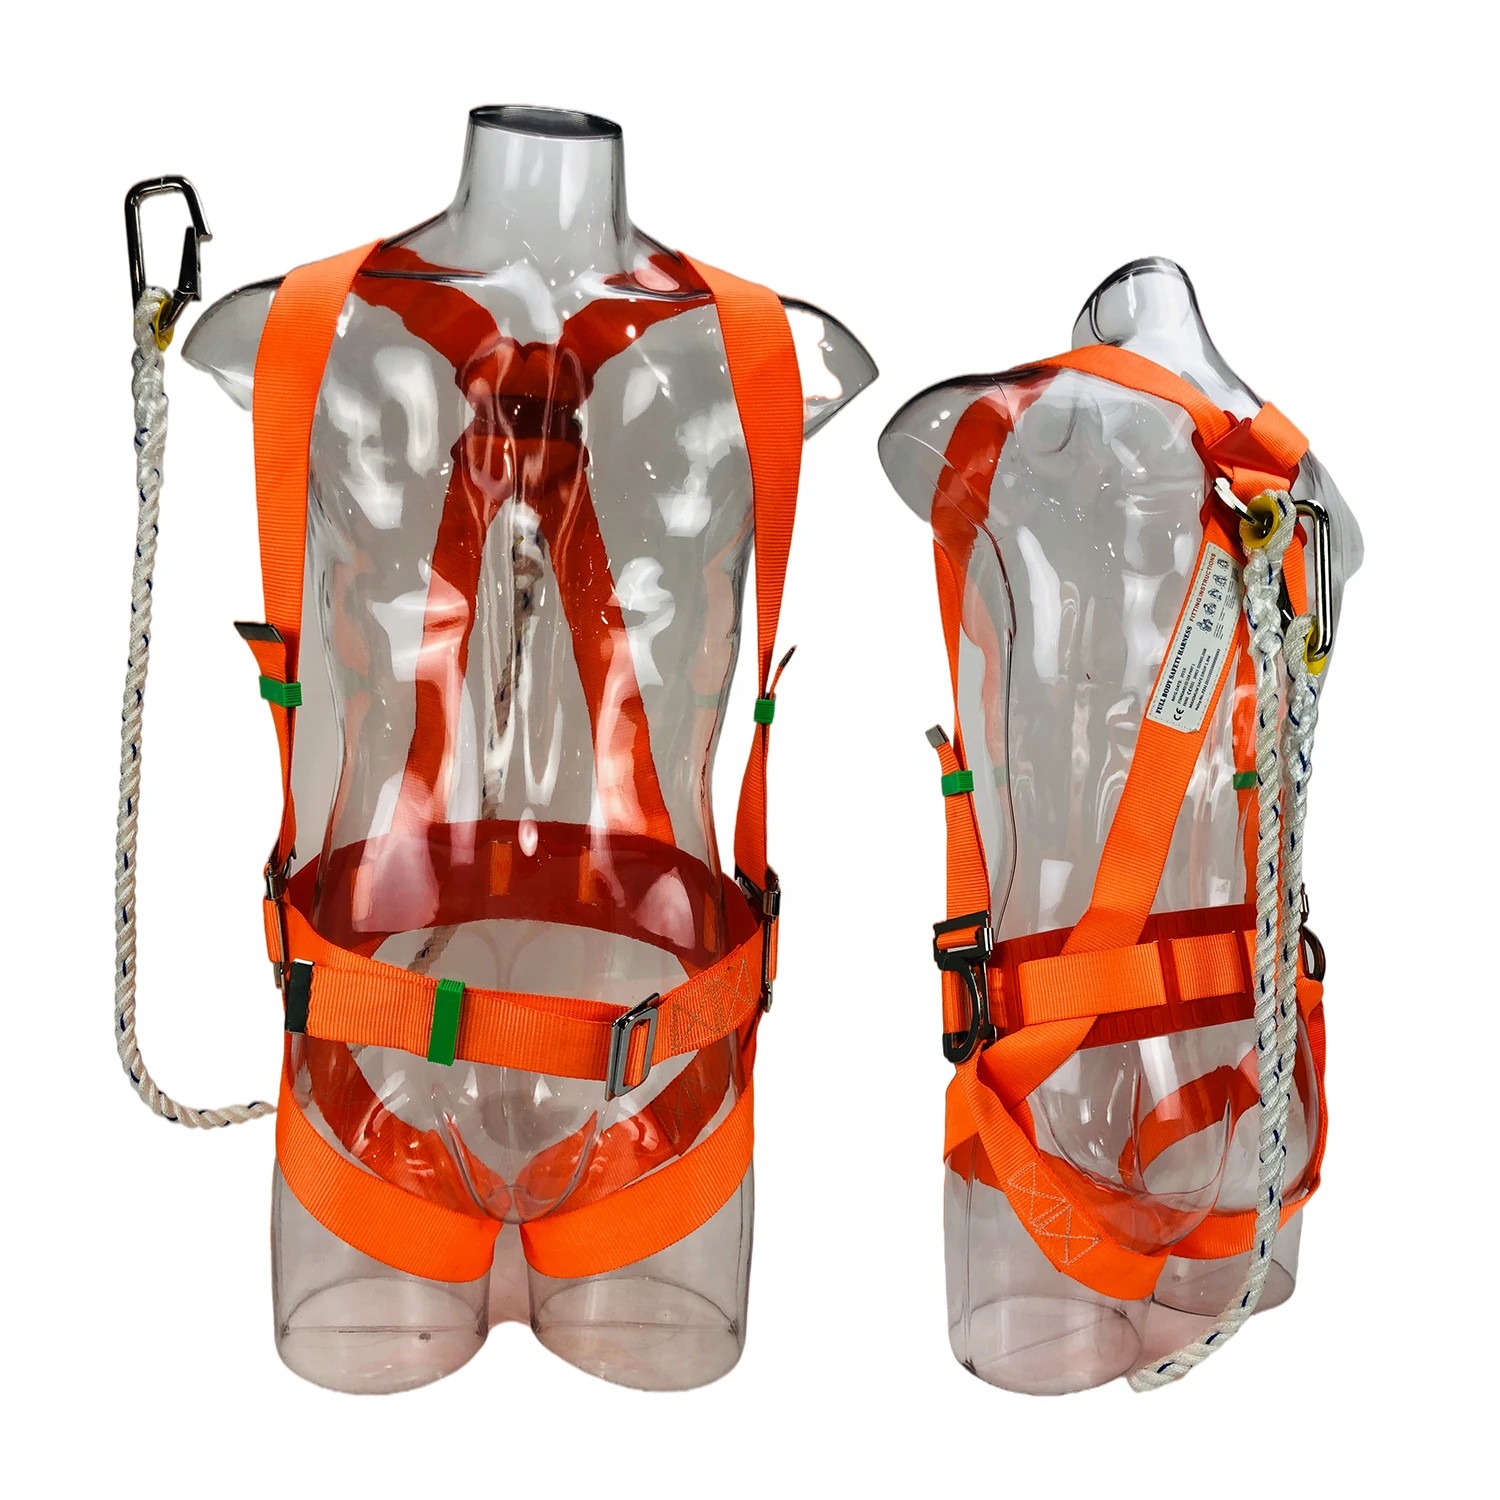 Professional Industrial Worker&#x27;s Protection Personal Protective Equipment Full Body Safety Harness